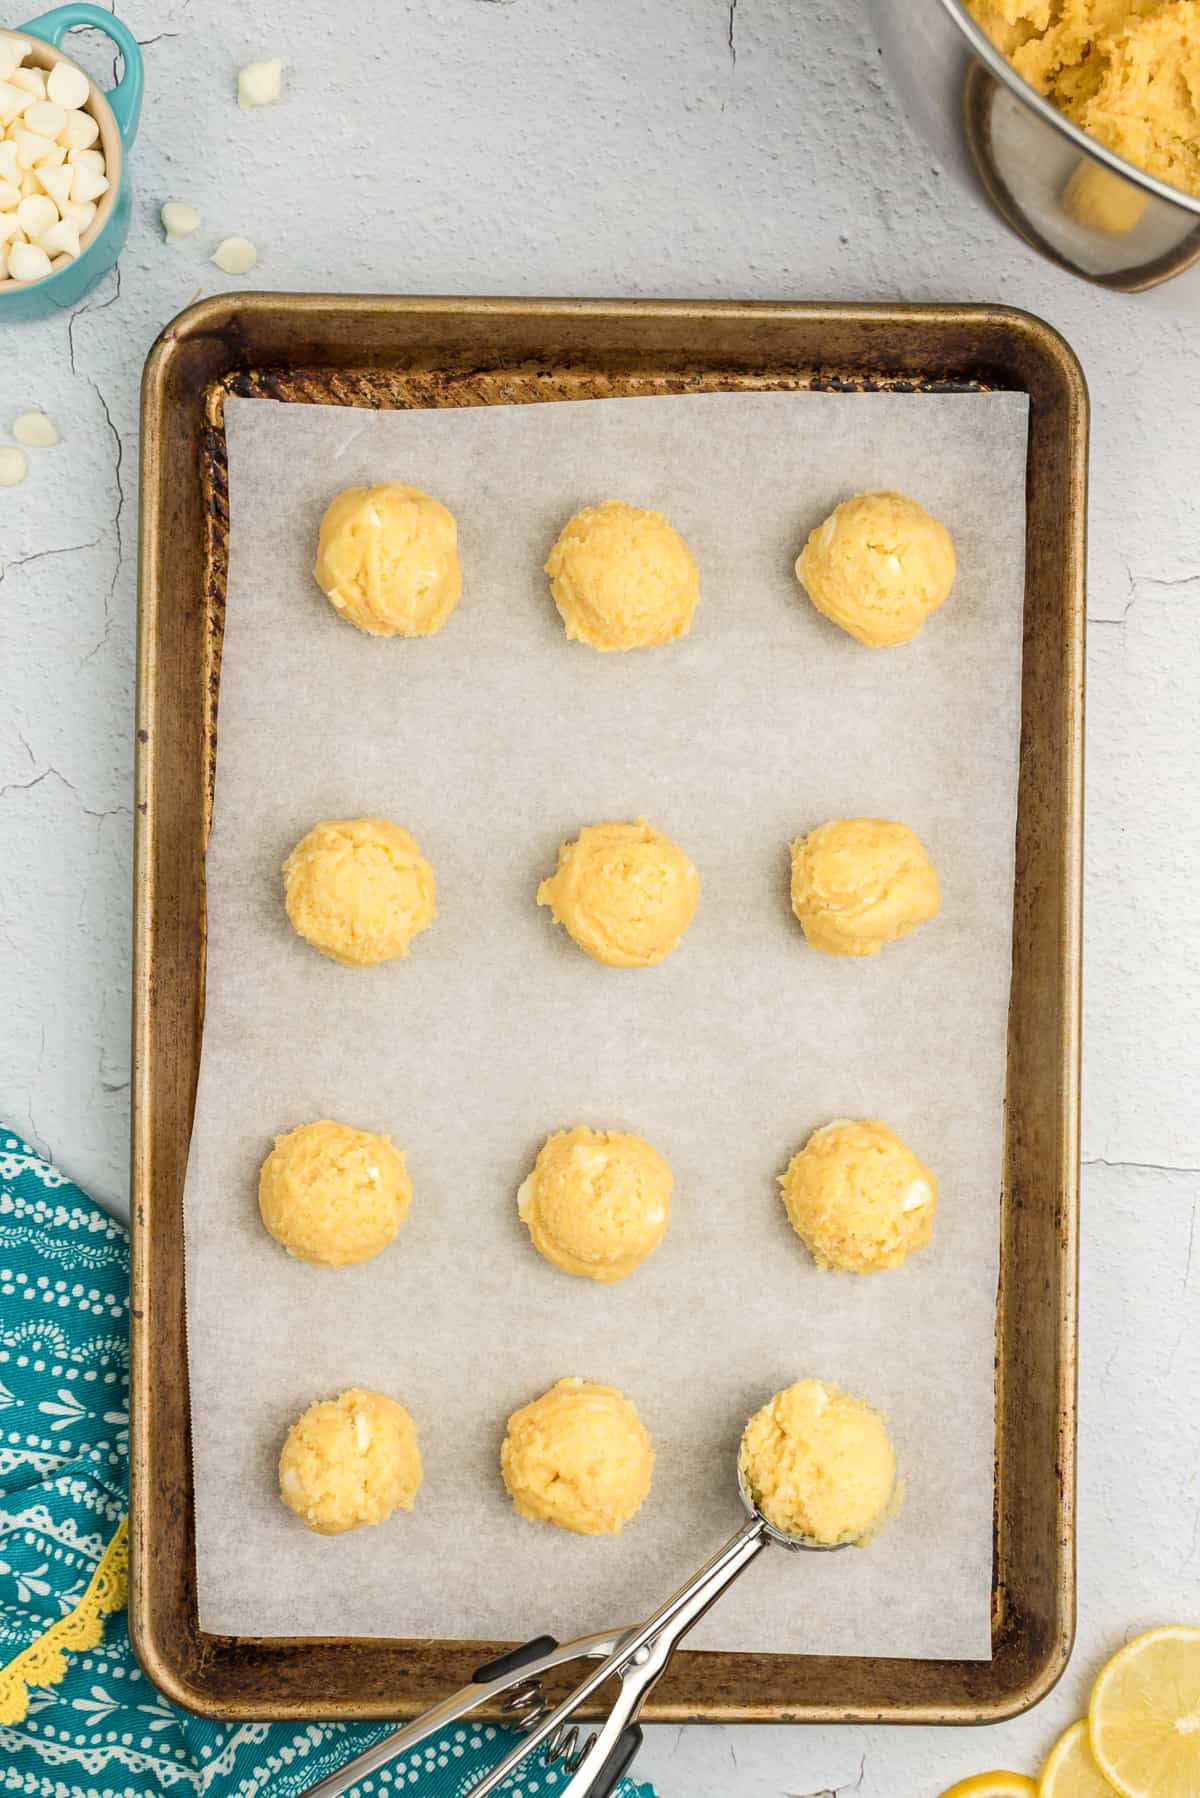 Lemon cookie dough scooped on lined baking sheet.